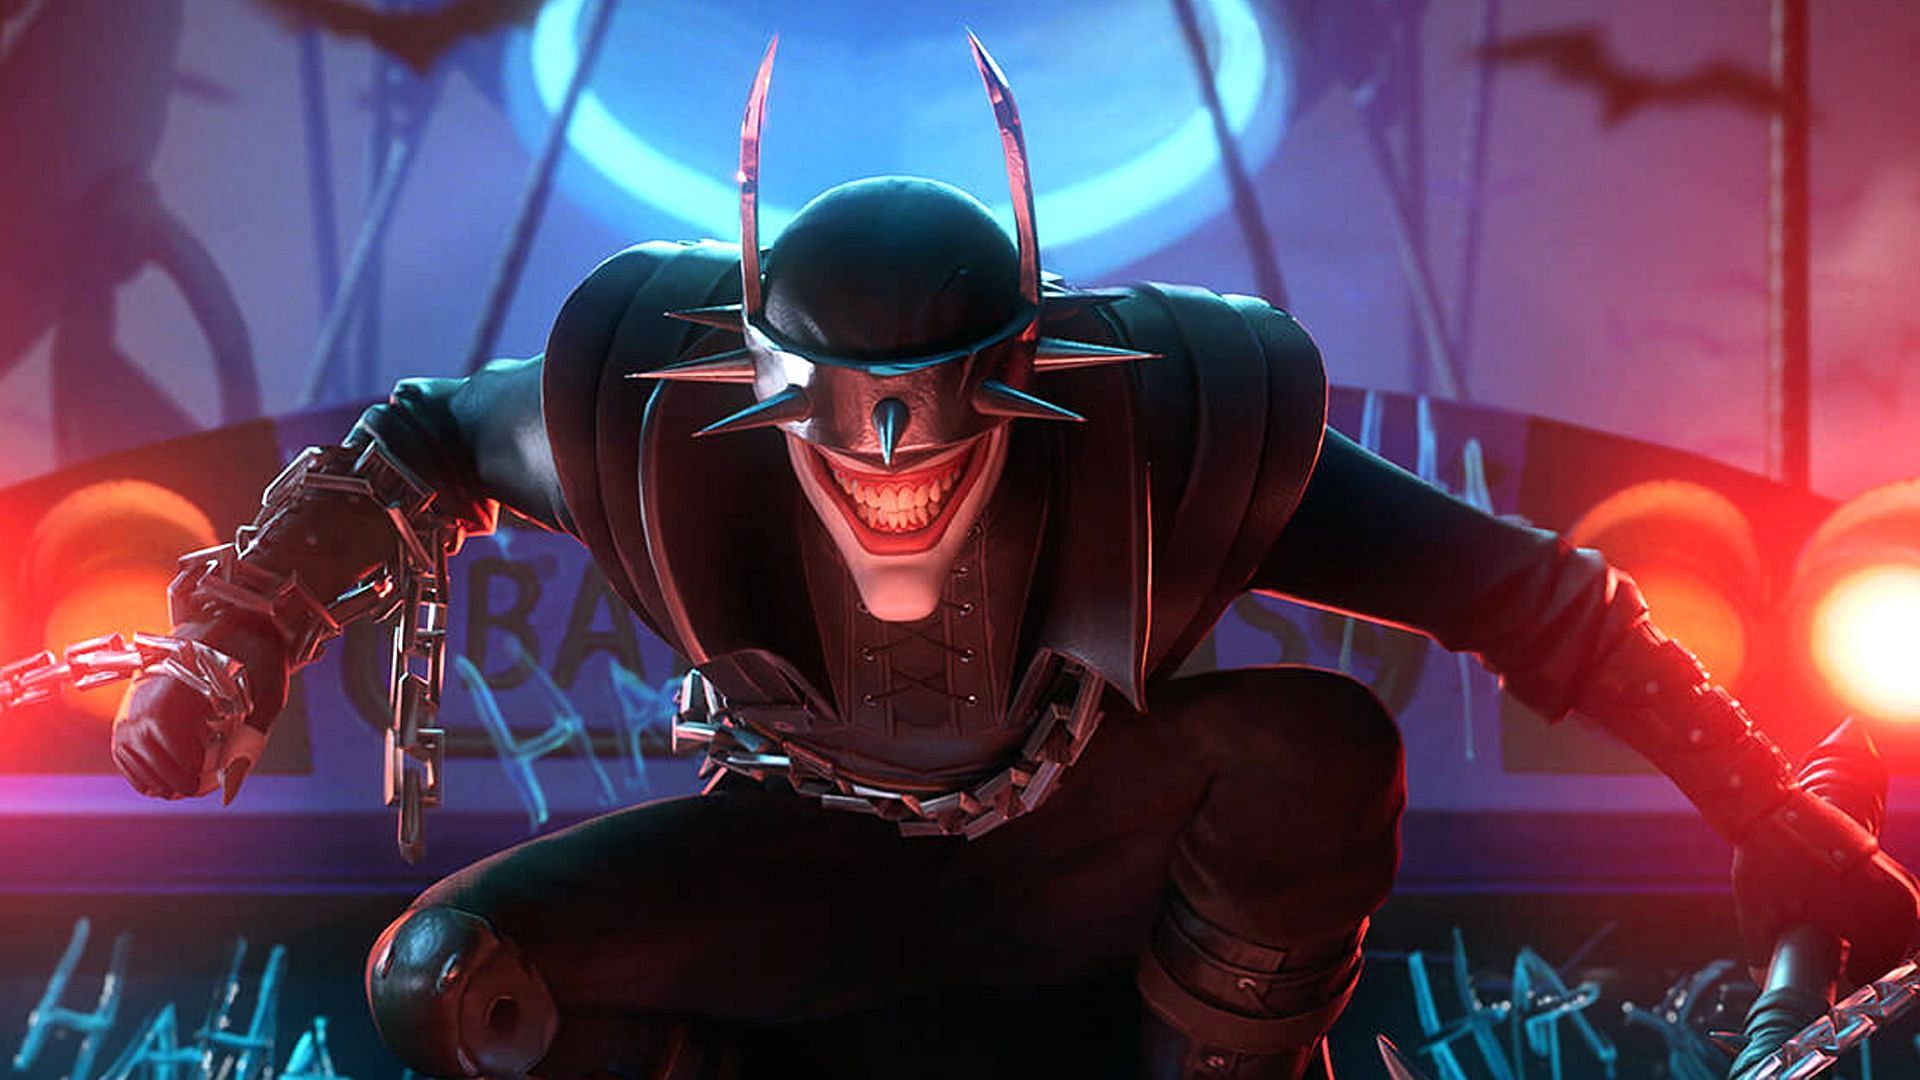 The Batman Who Laughs revealed in Fortnite (Image via Epic Games)